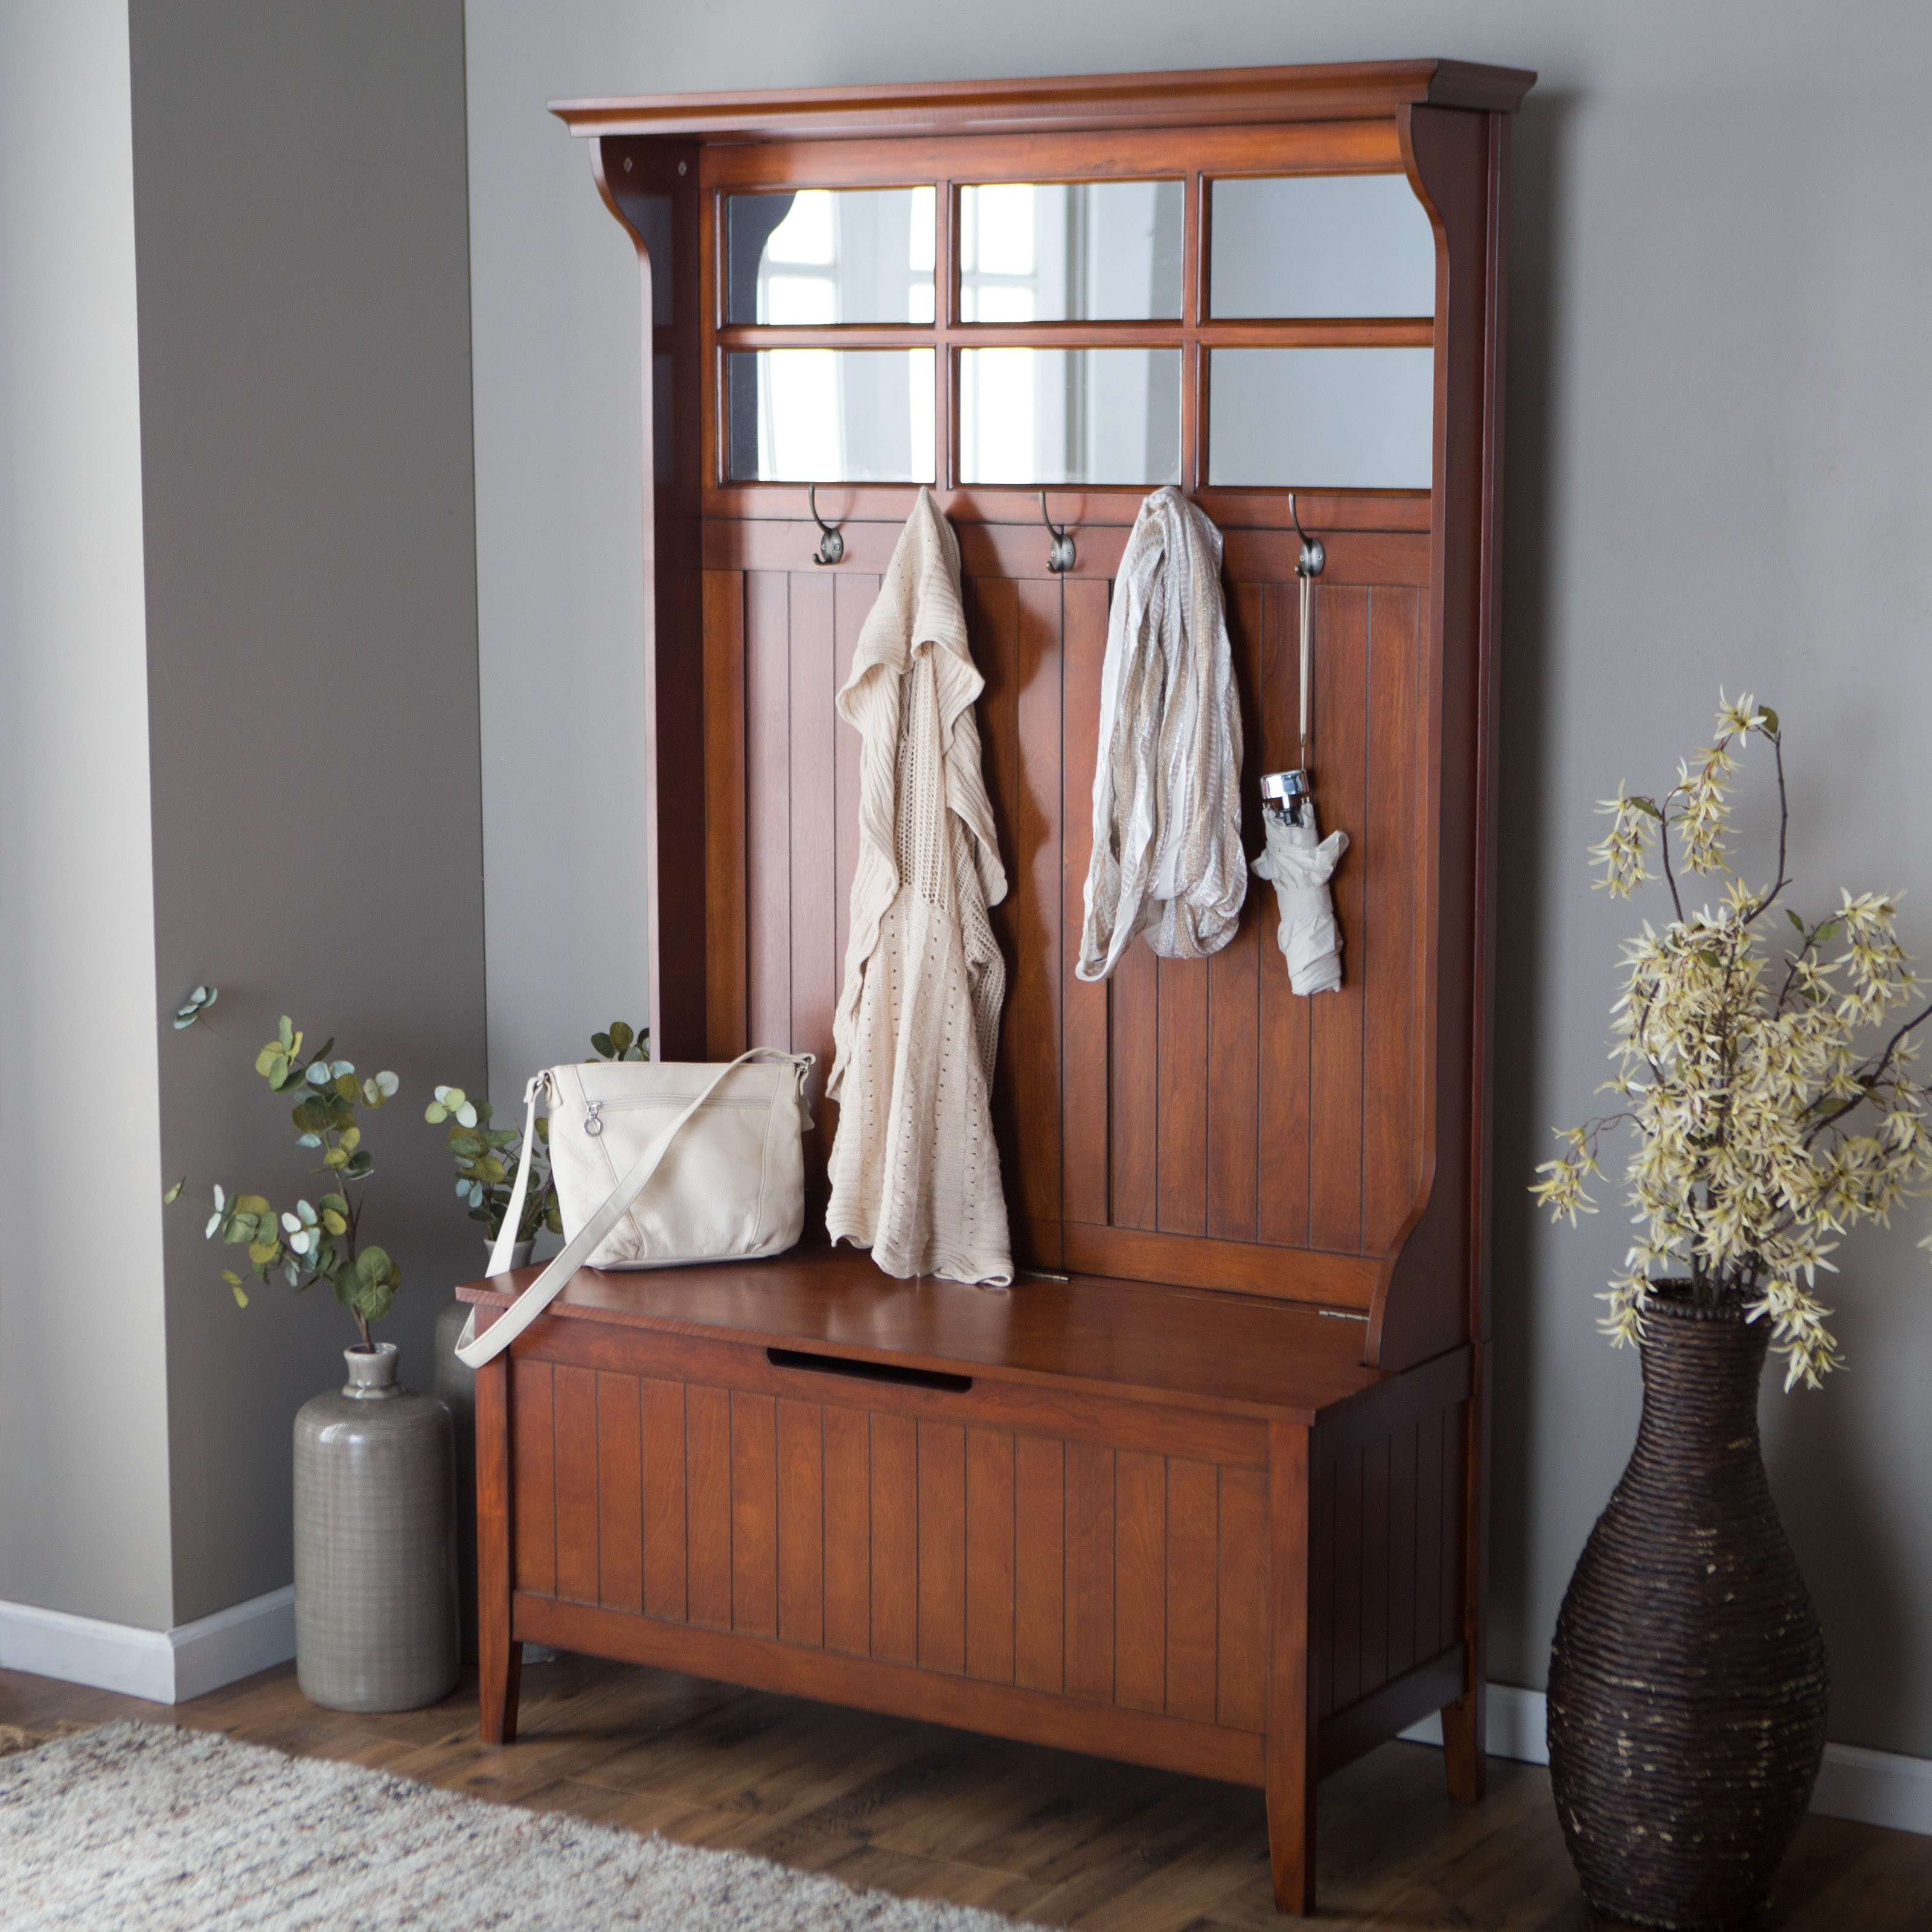 How To Build An Entryway Coat Rack And Storage Bench - vrogue.co